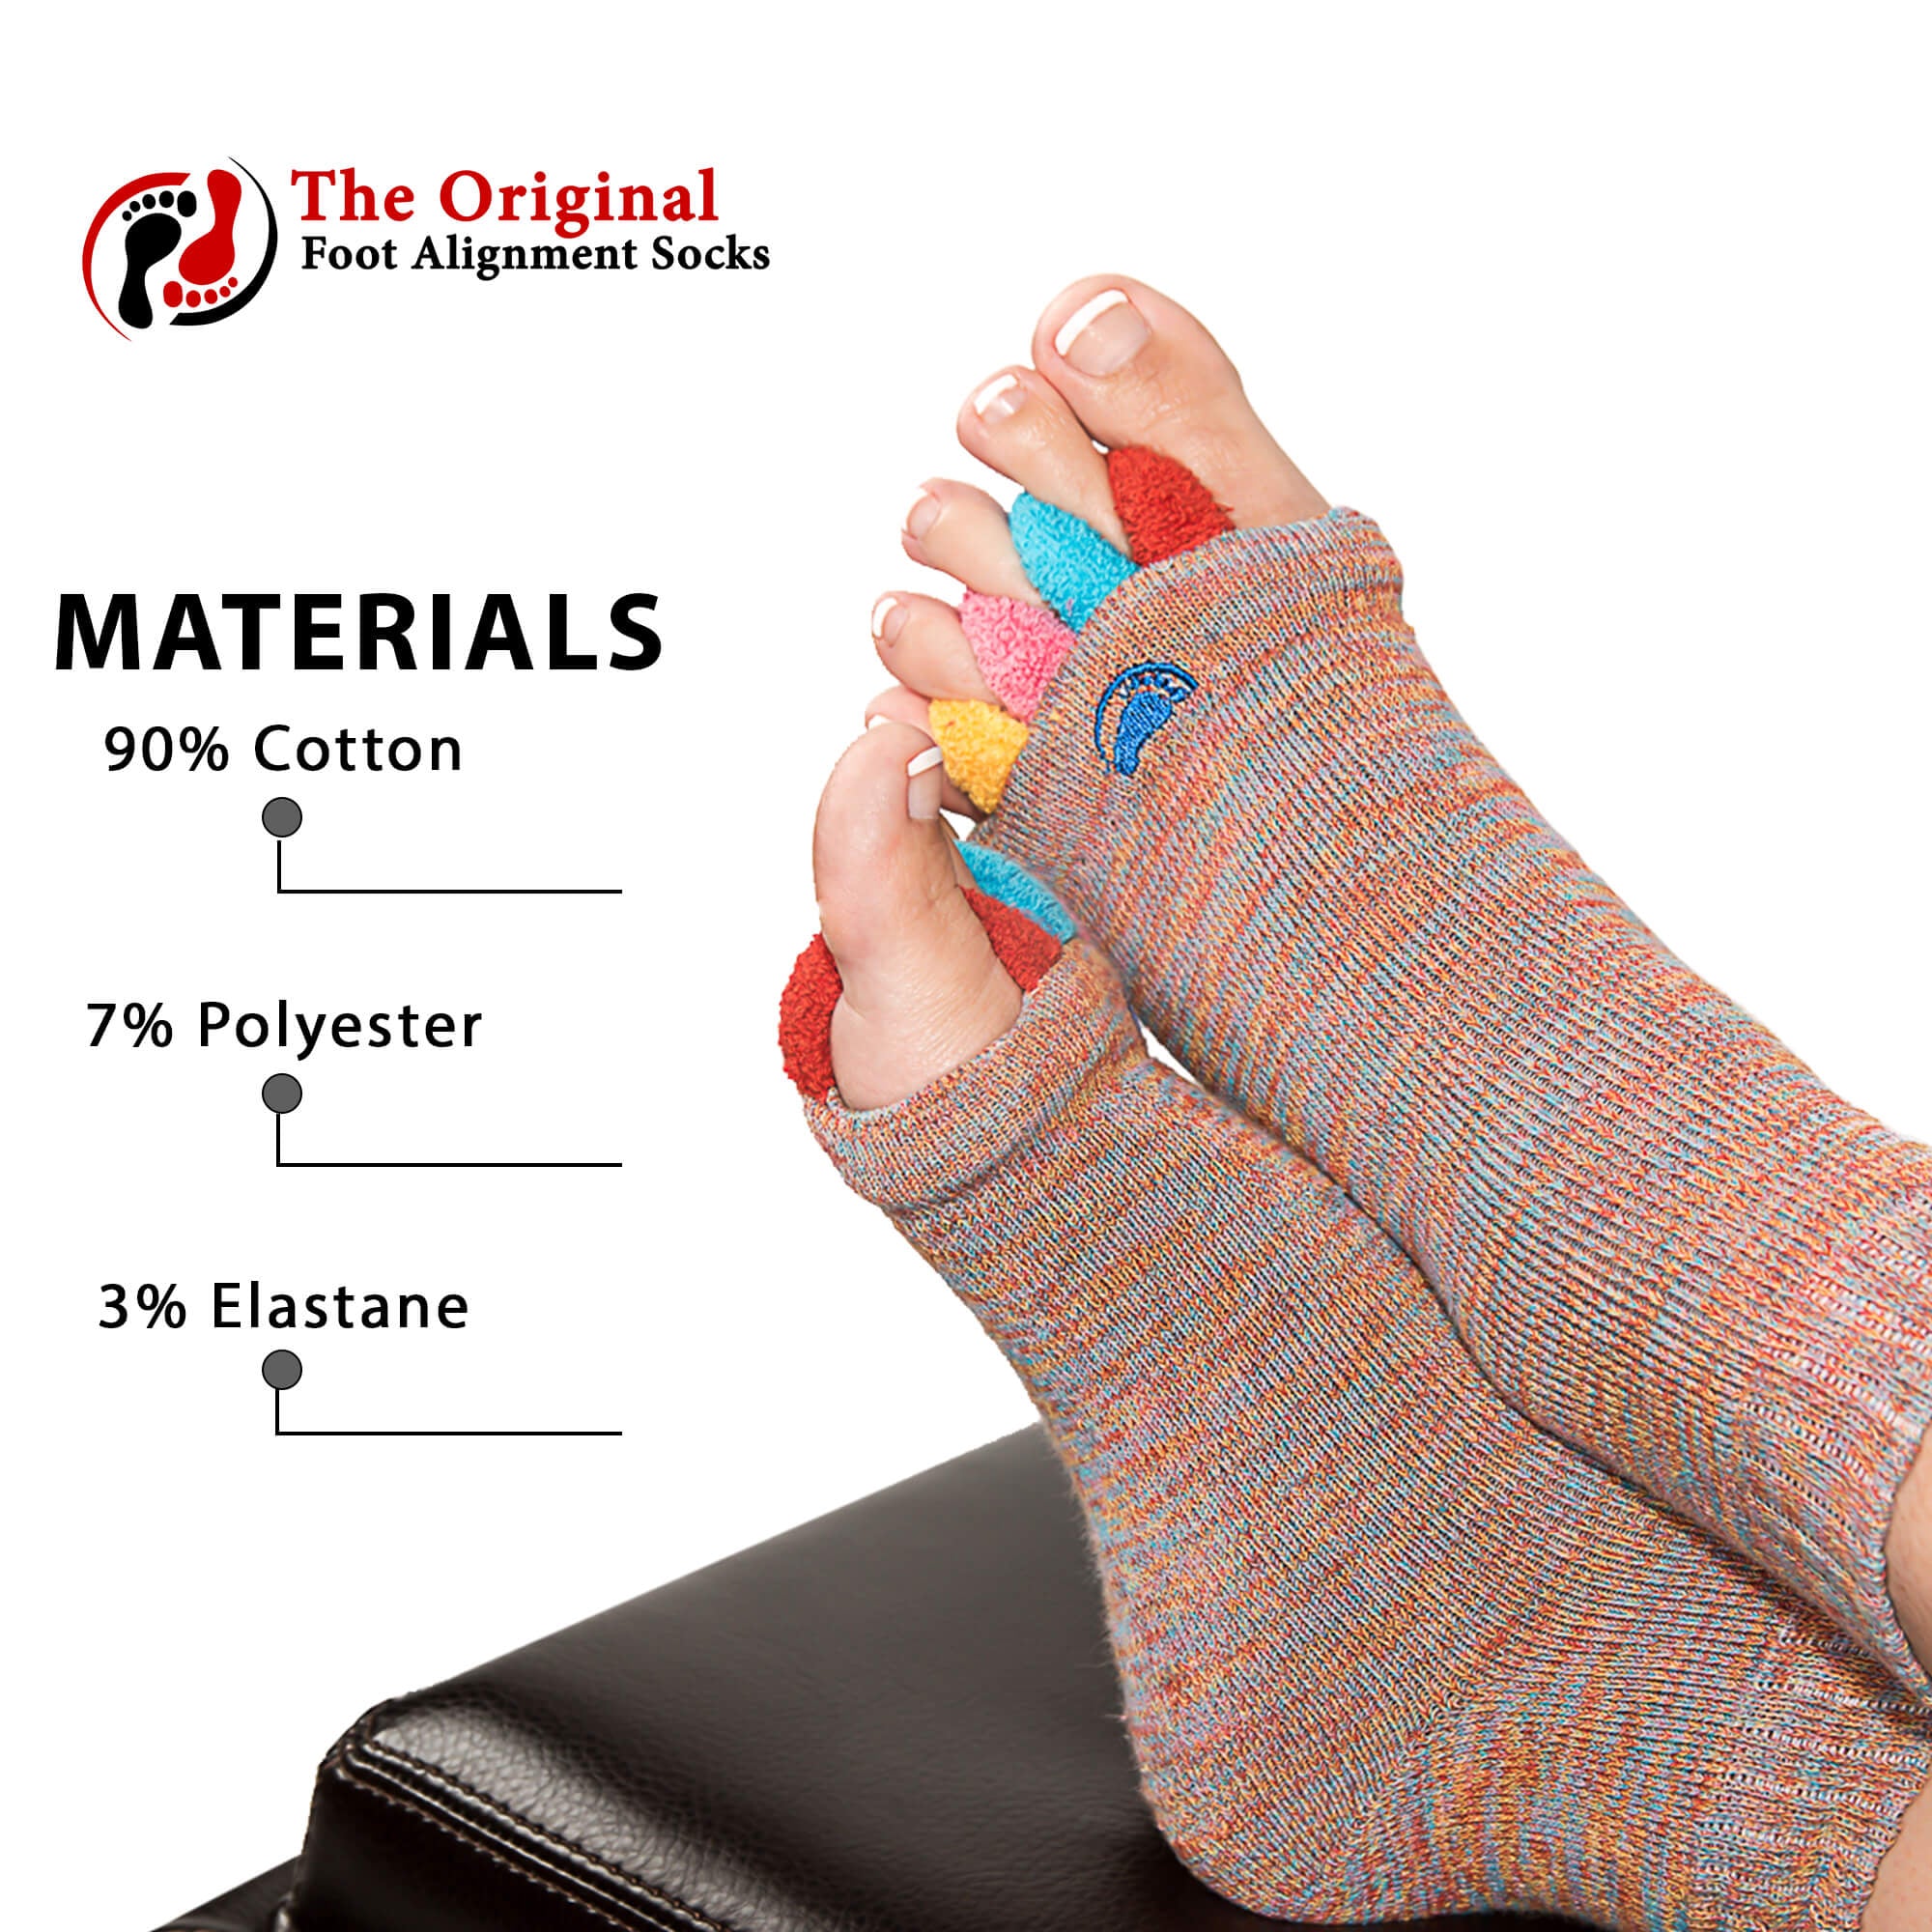 Foot Alignment Socks by Happy Feet Company in Mentor, OH - Alignable